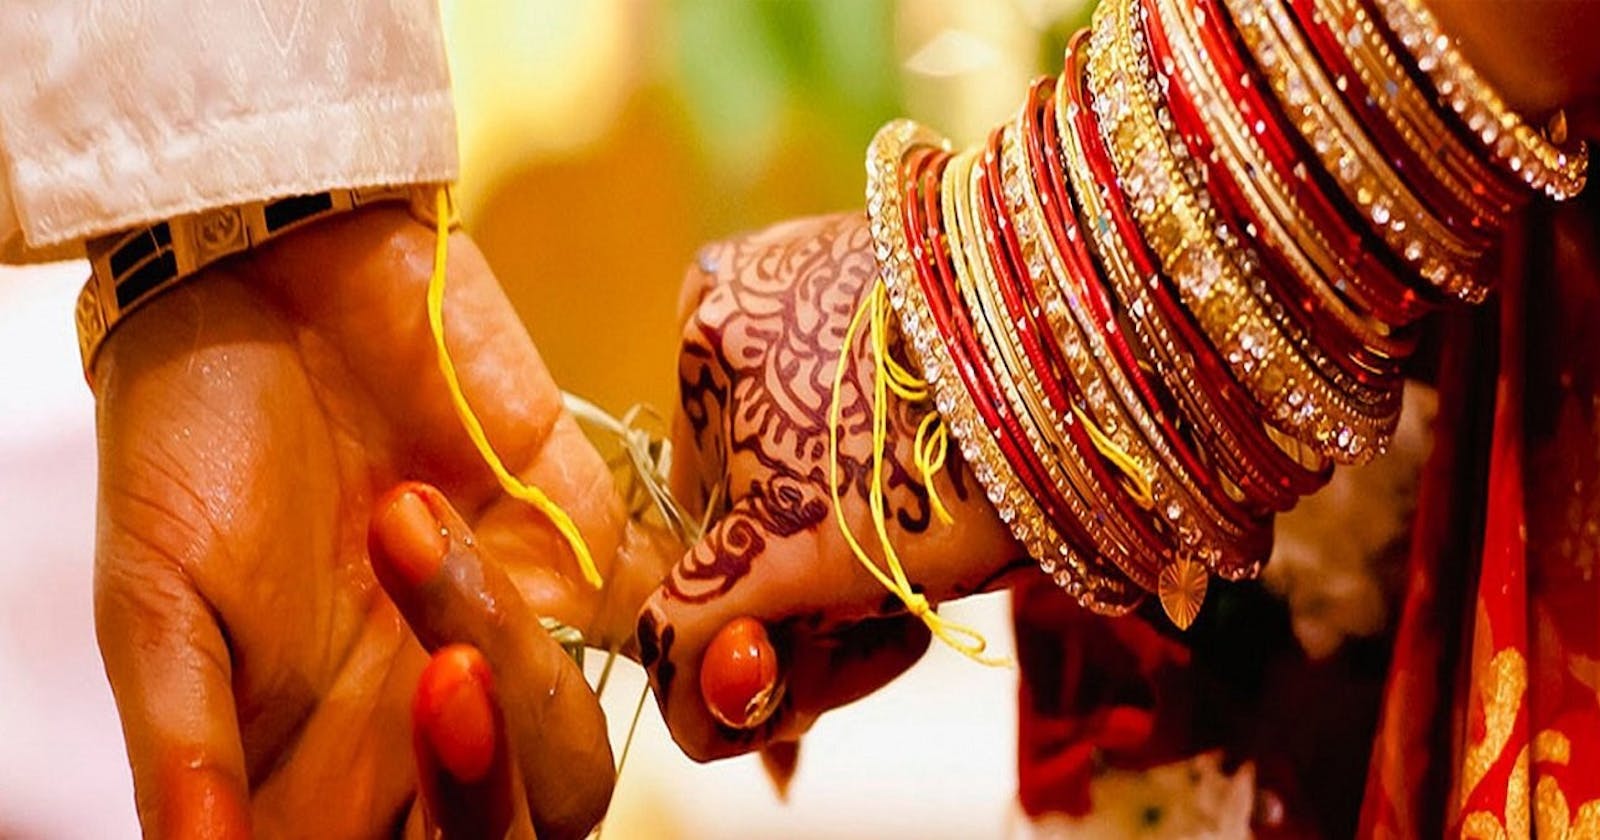 Why should you prefer Reputable Matrimonial sites to find an Indian Partner in the UK?